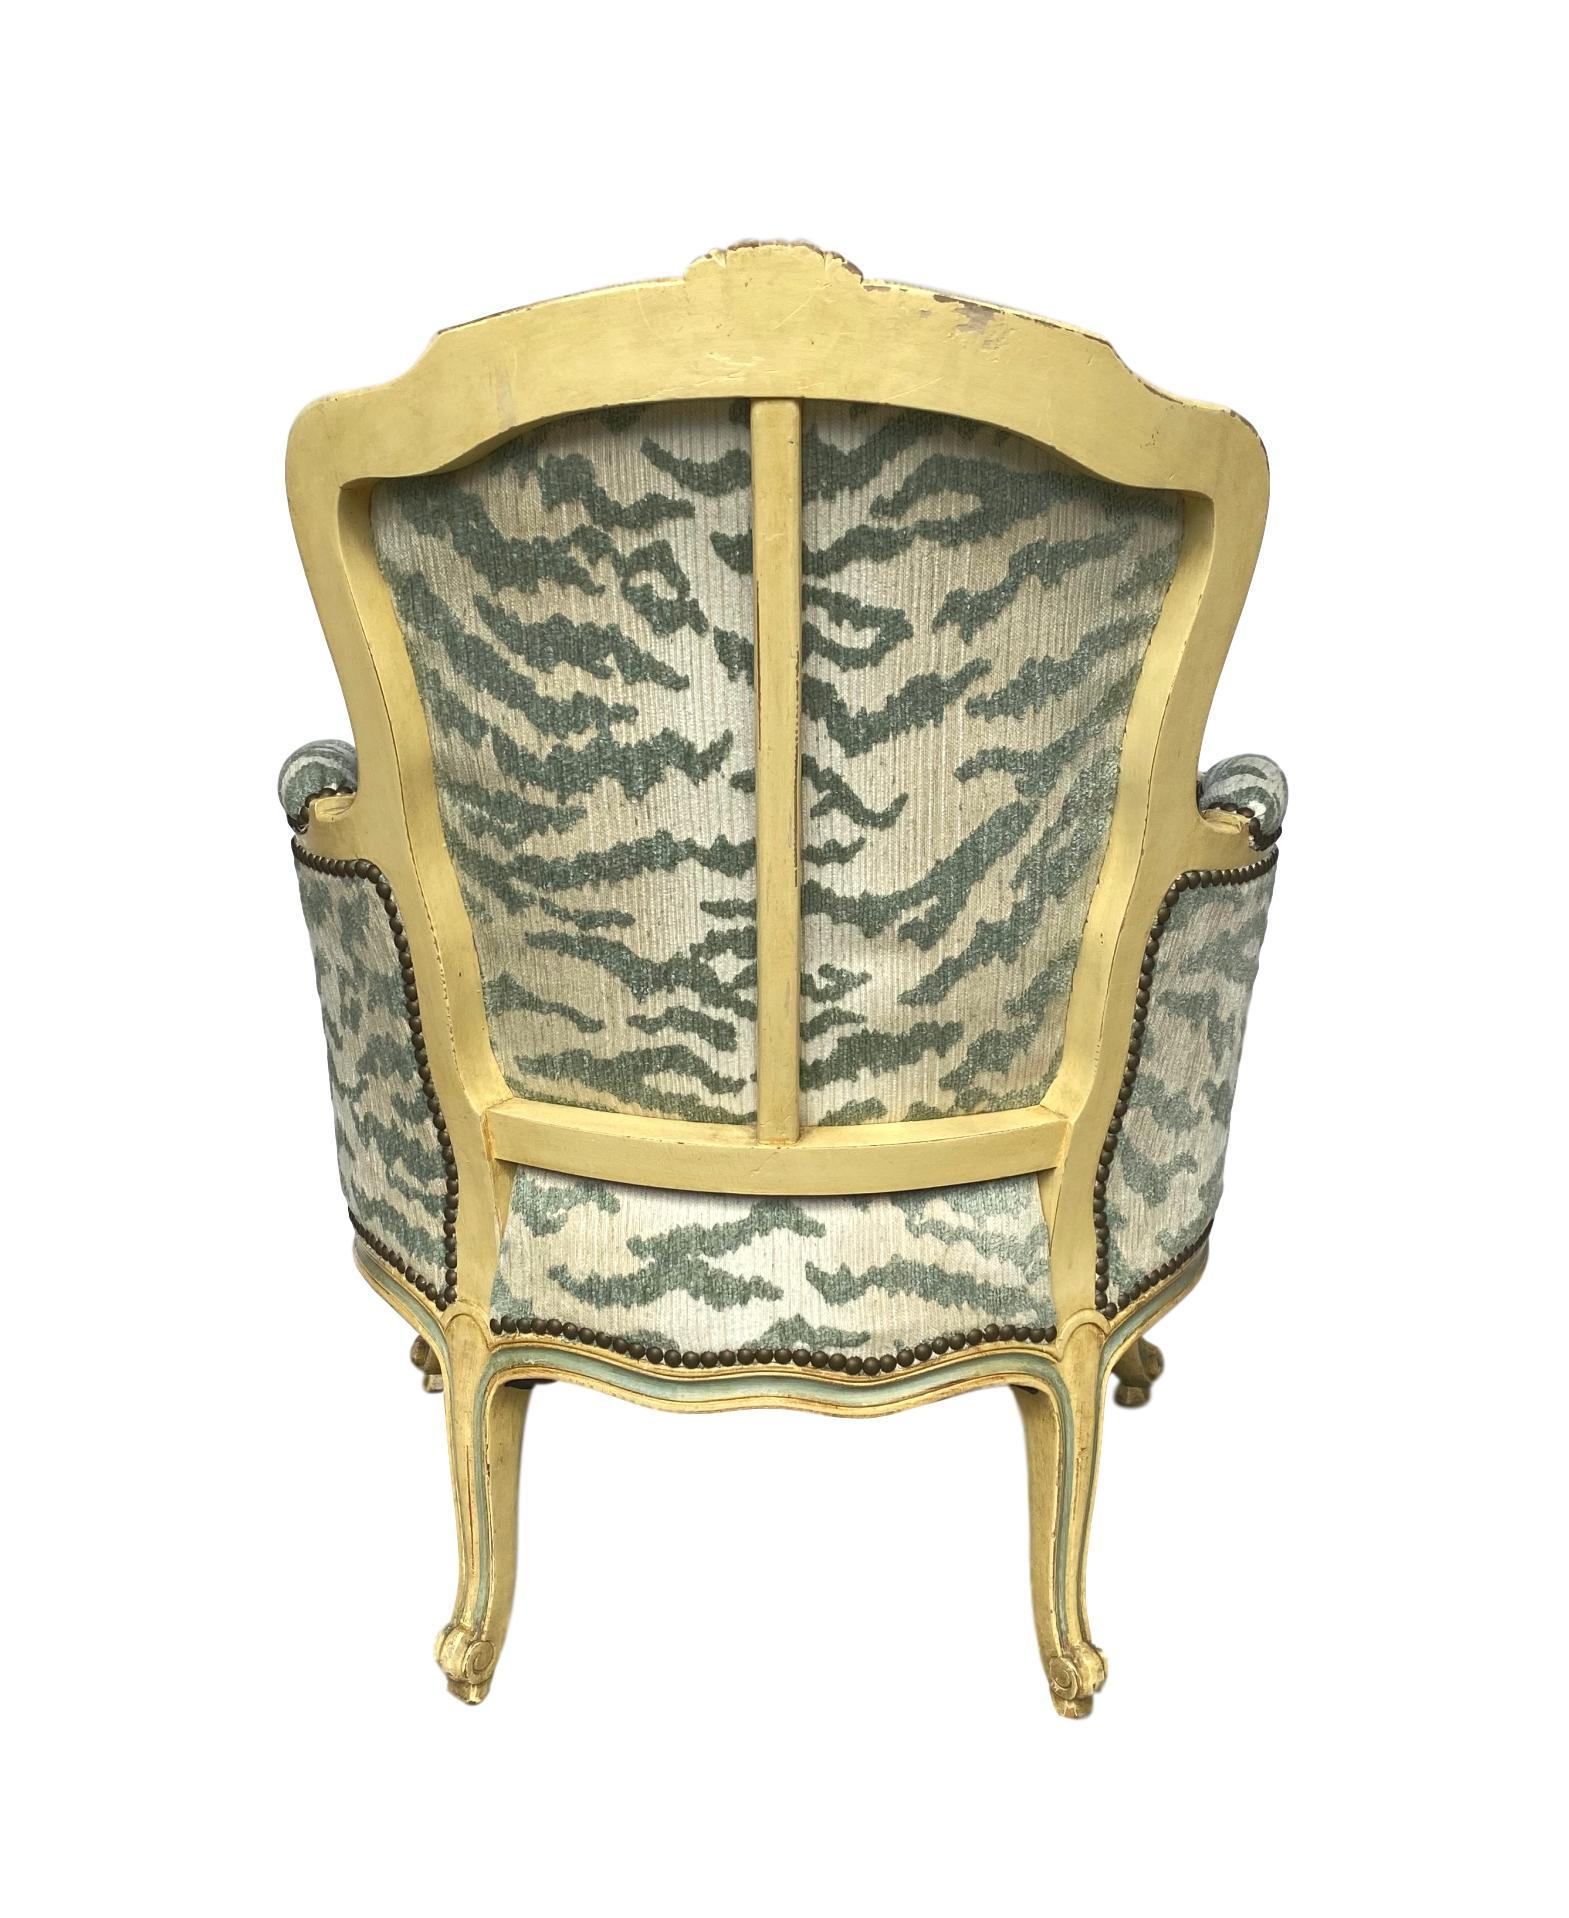 20th Century French Bergère Chair, Carved and Painted in Ivory and Celadon Newly Upholstered